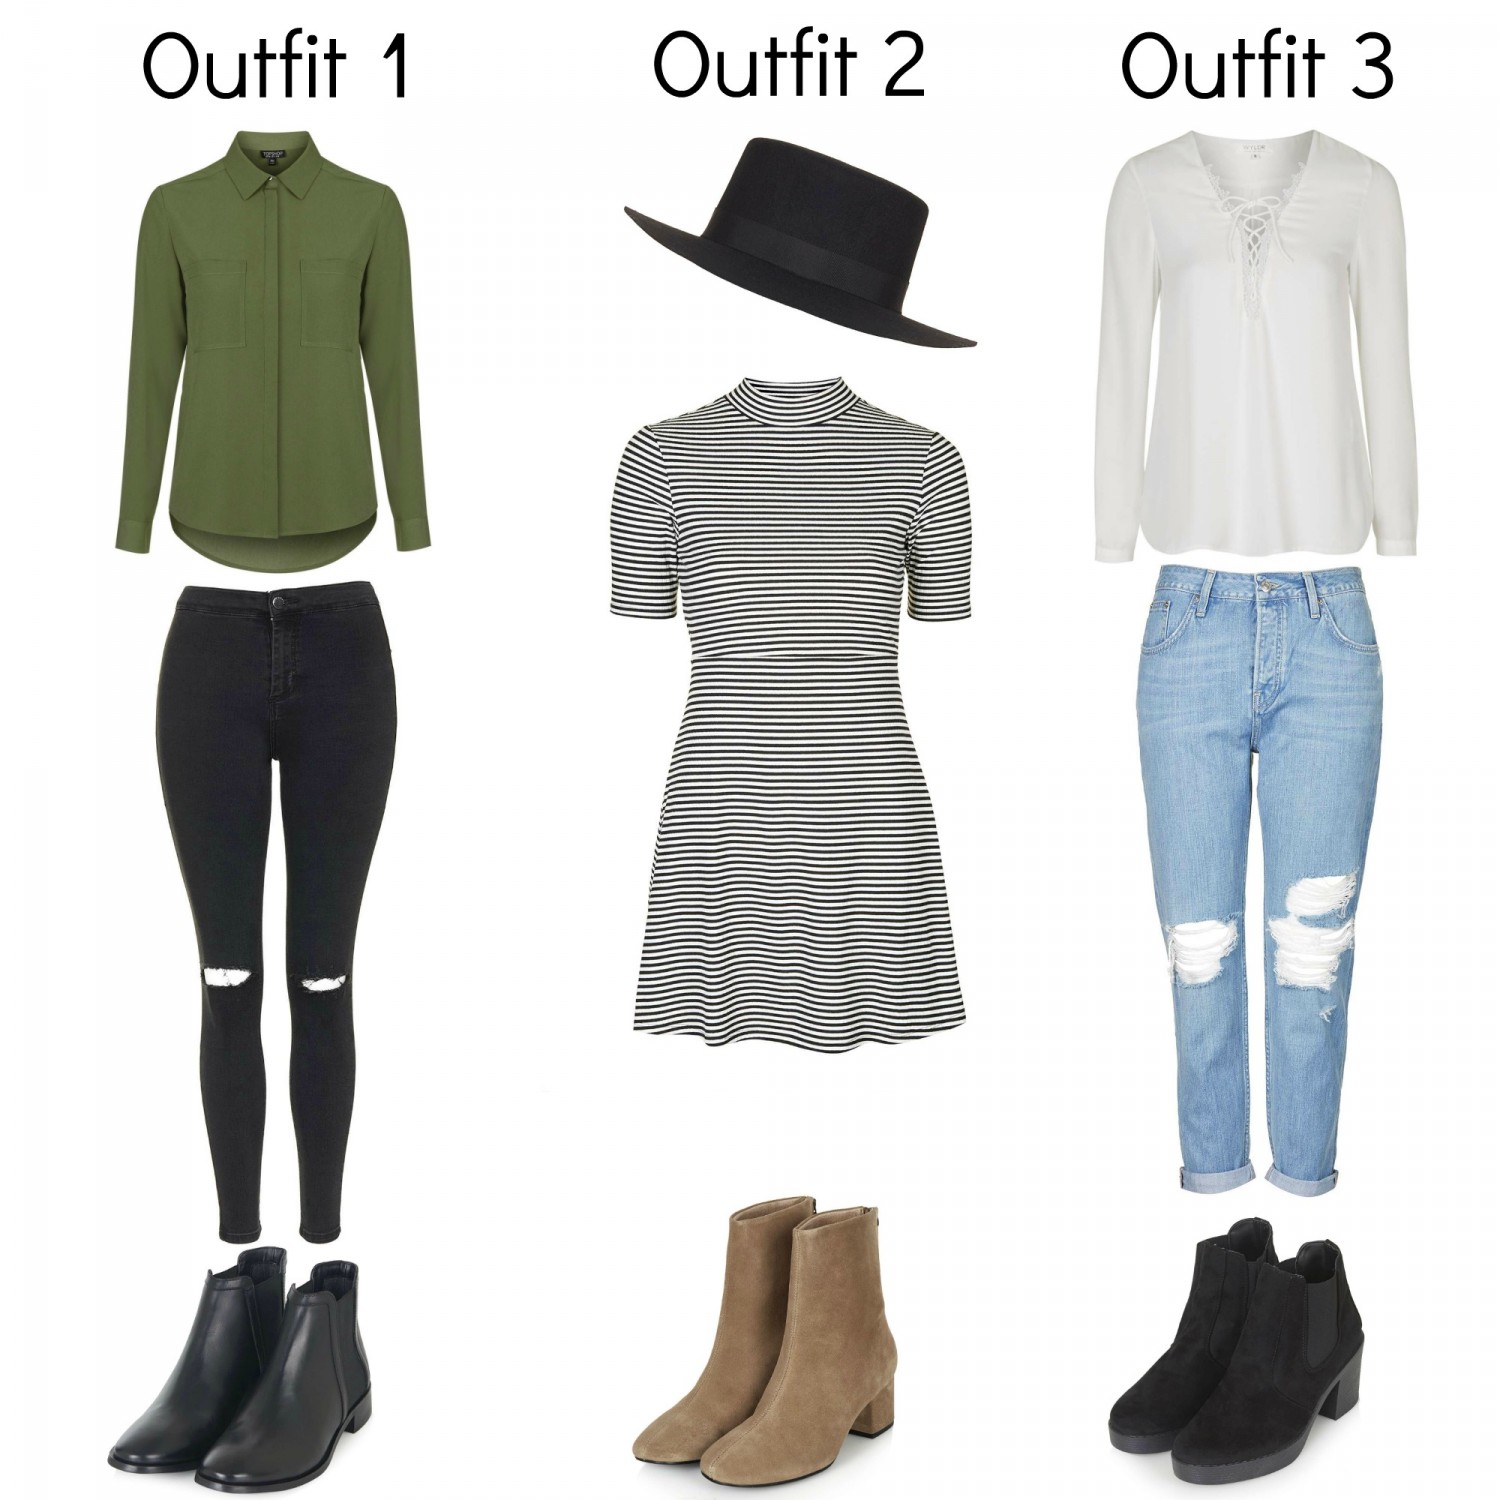 Concert outfits